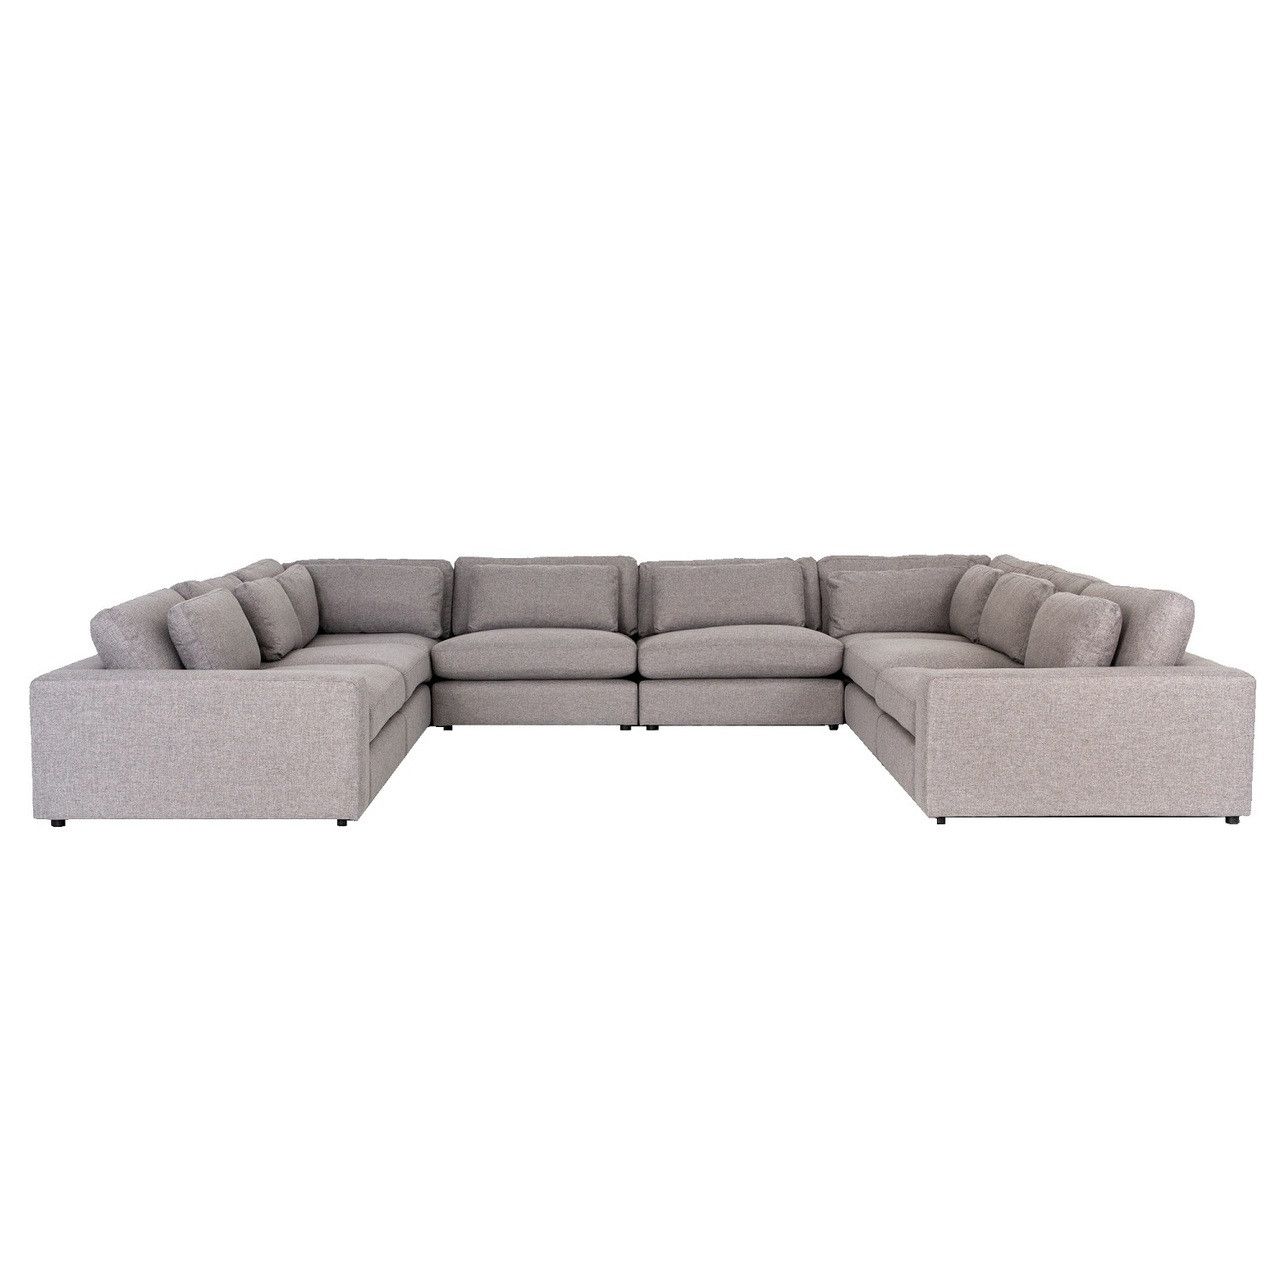 Bloor Contemporary Gray Fabric 8 Piece U Shaped Sectional Sofa 170" For Modern U Shape Sectional Sofas In Gray (Gallery 9 of 20)